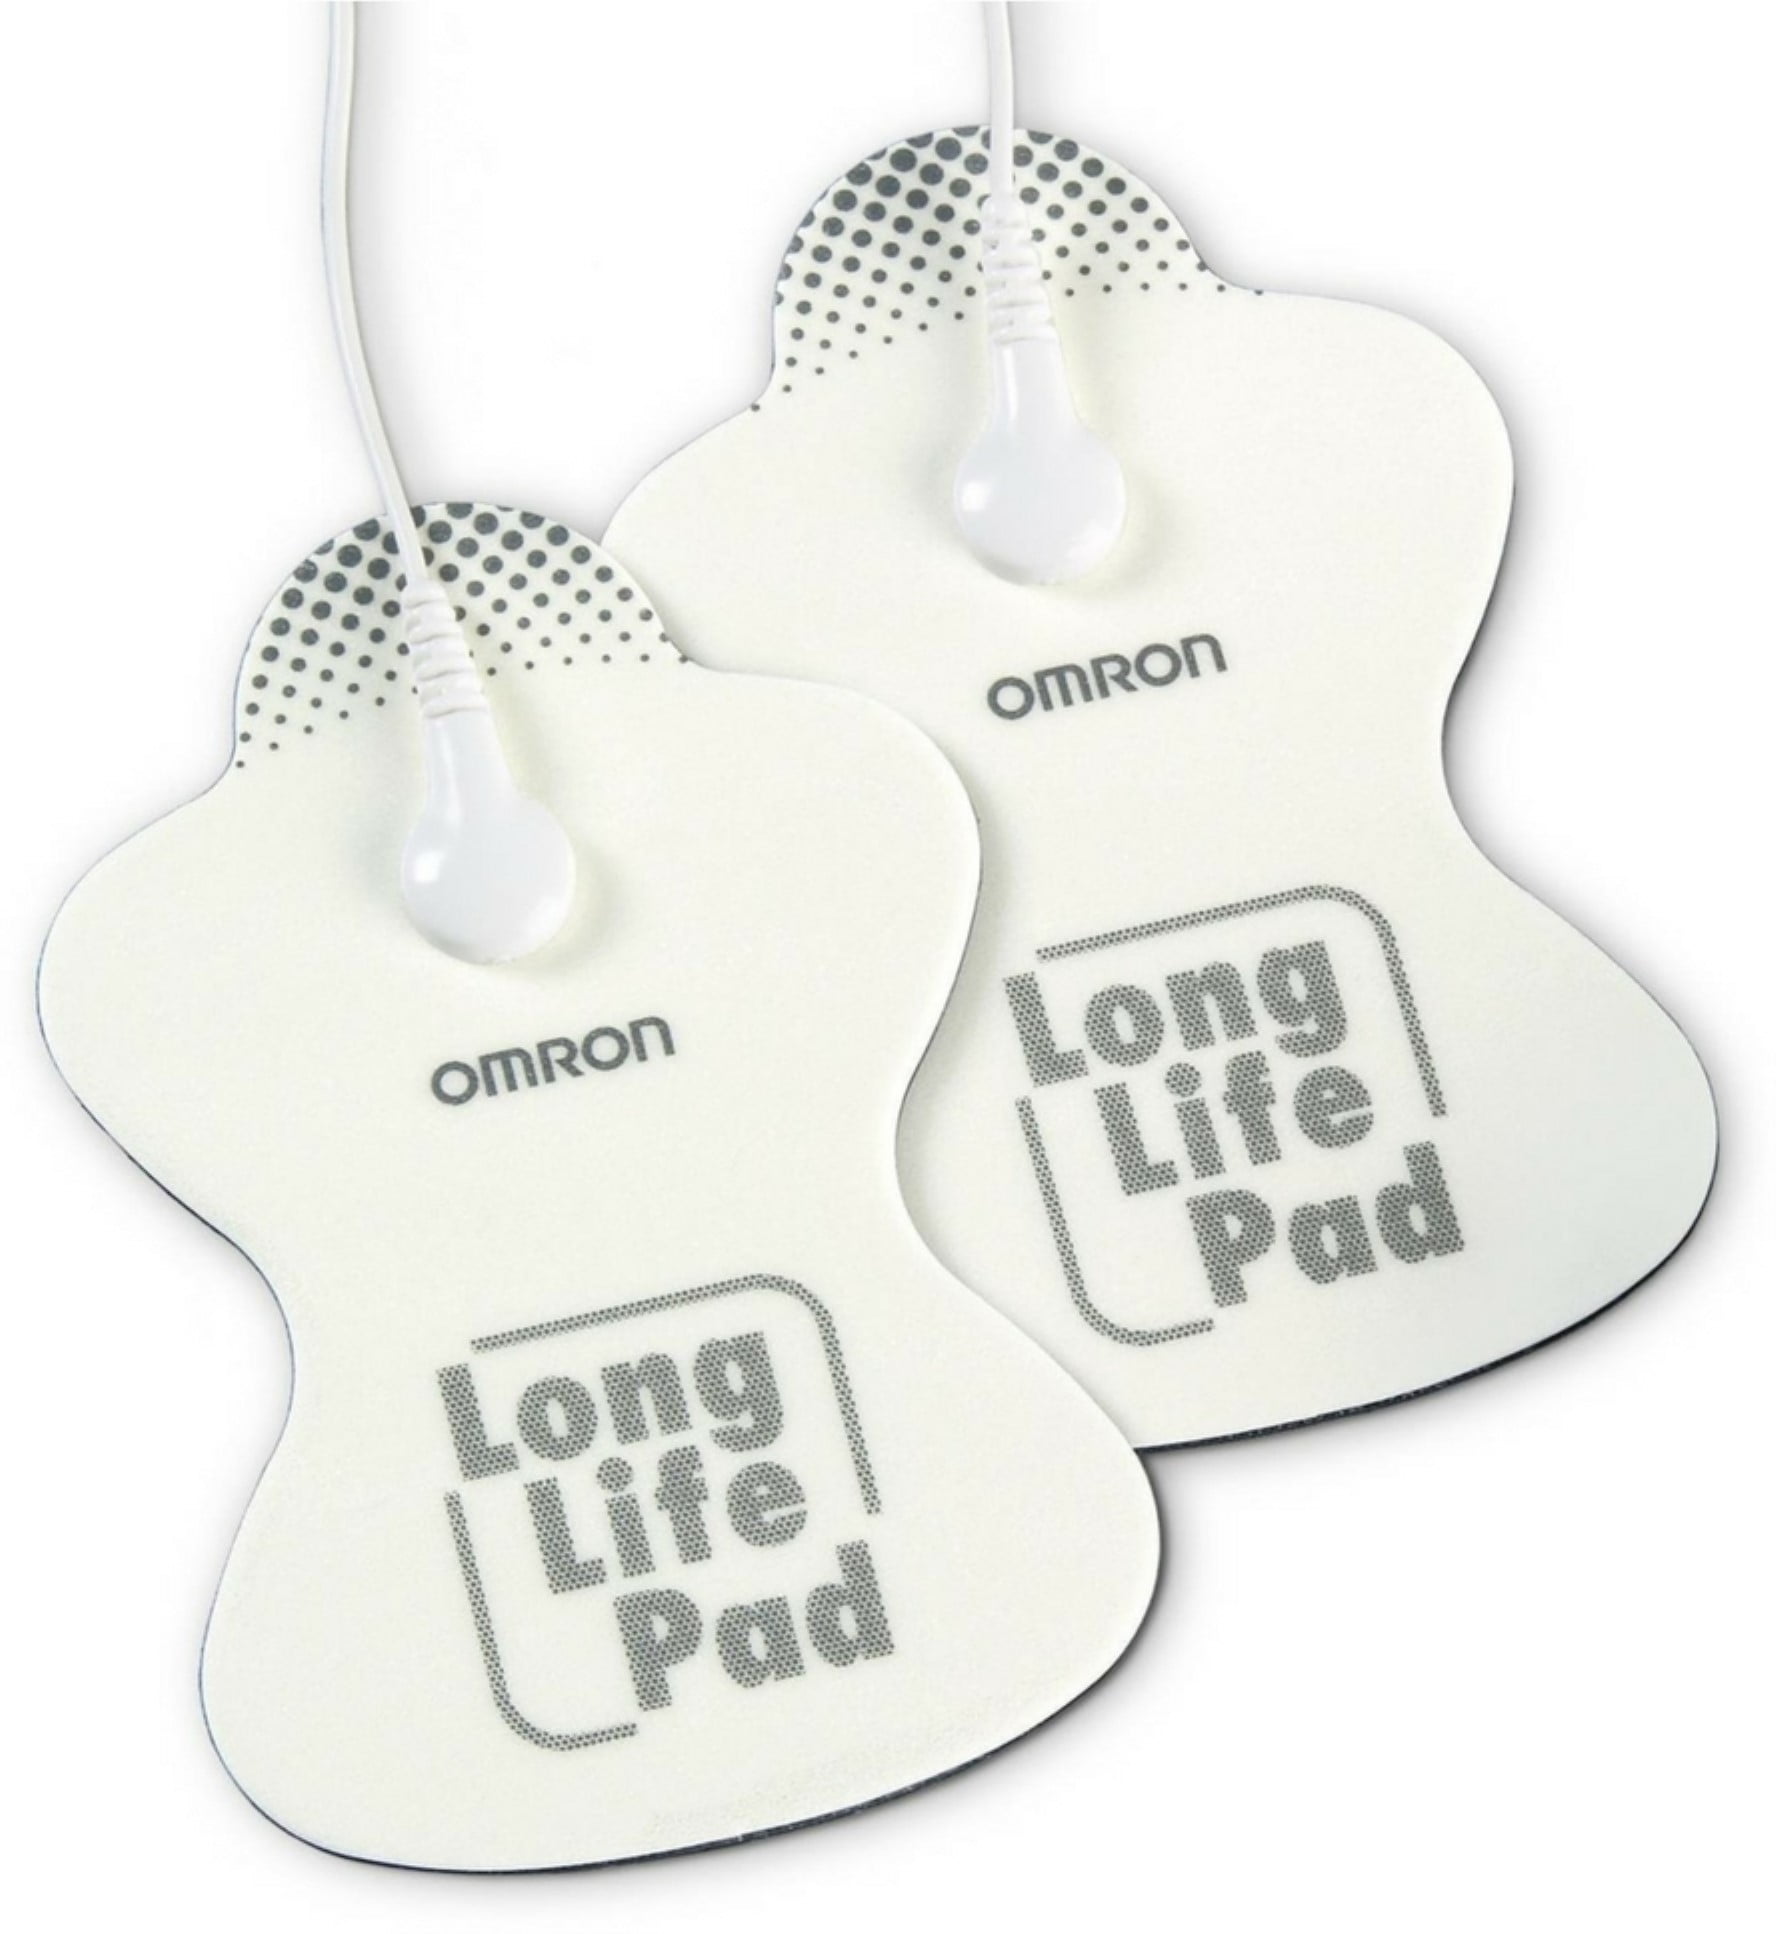 Omron Electrotherapy Pain Relief Pads - Standard 1.0 ea